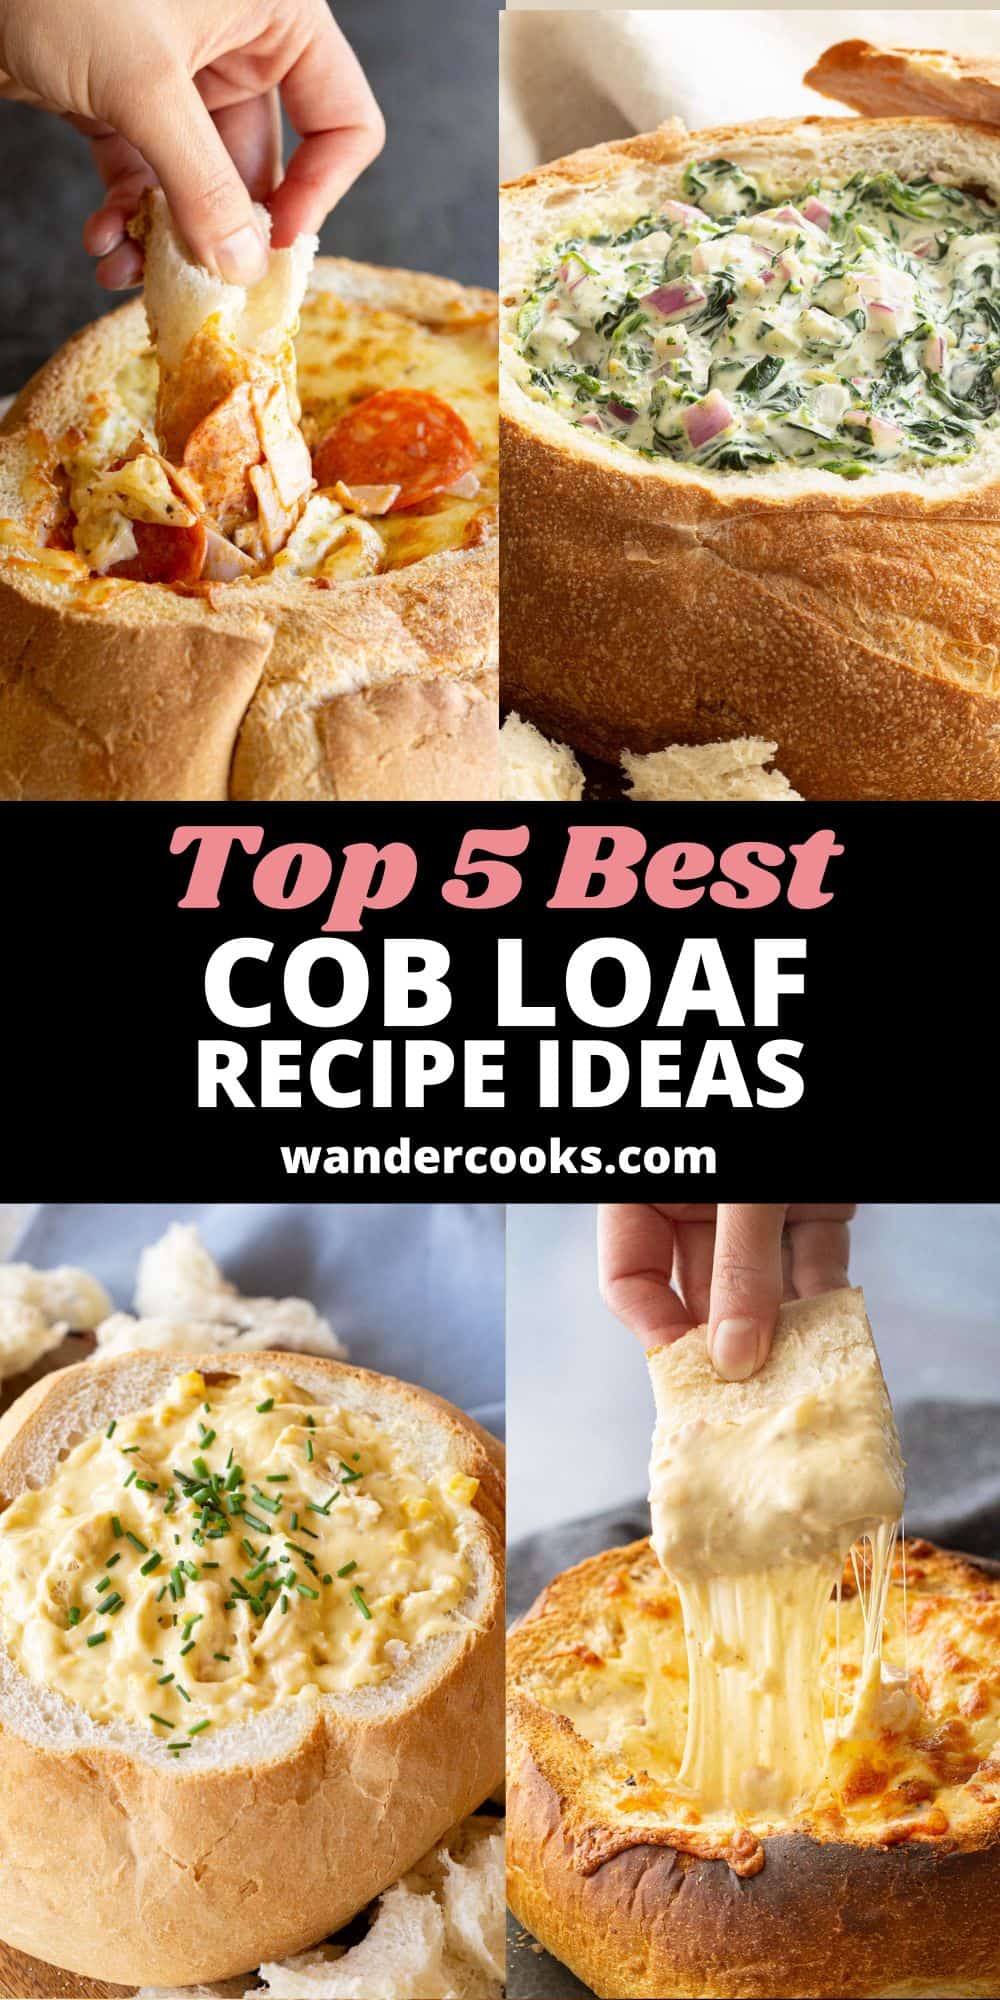 Top 5 BEST Cob Loaf Recipes to Get The Party Started